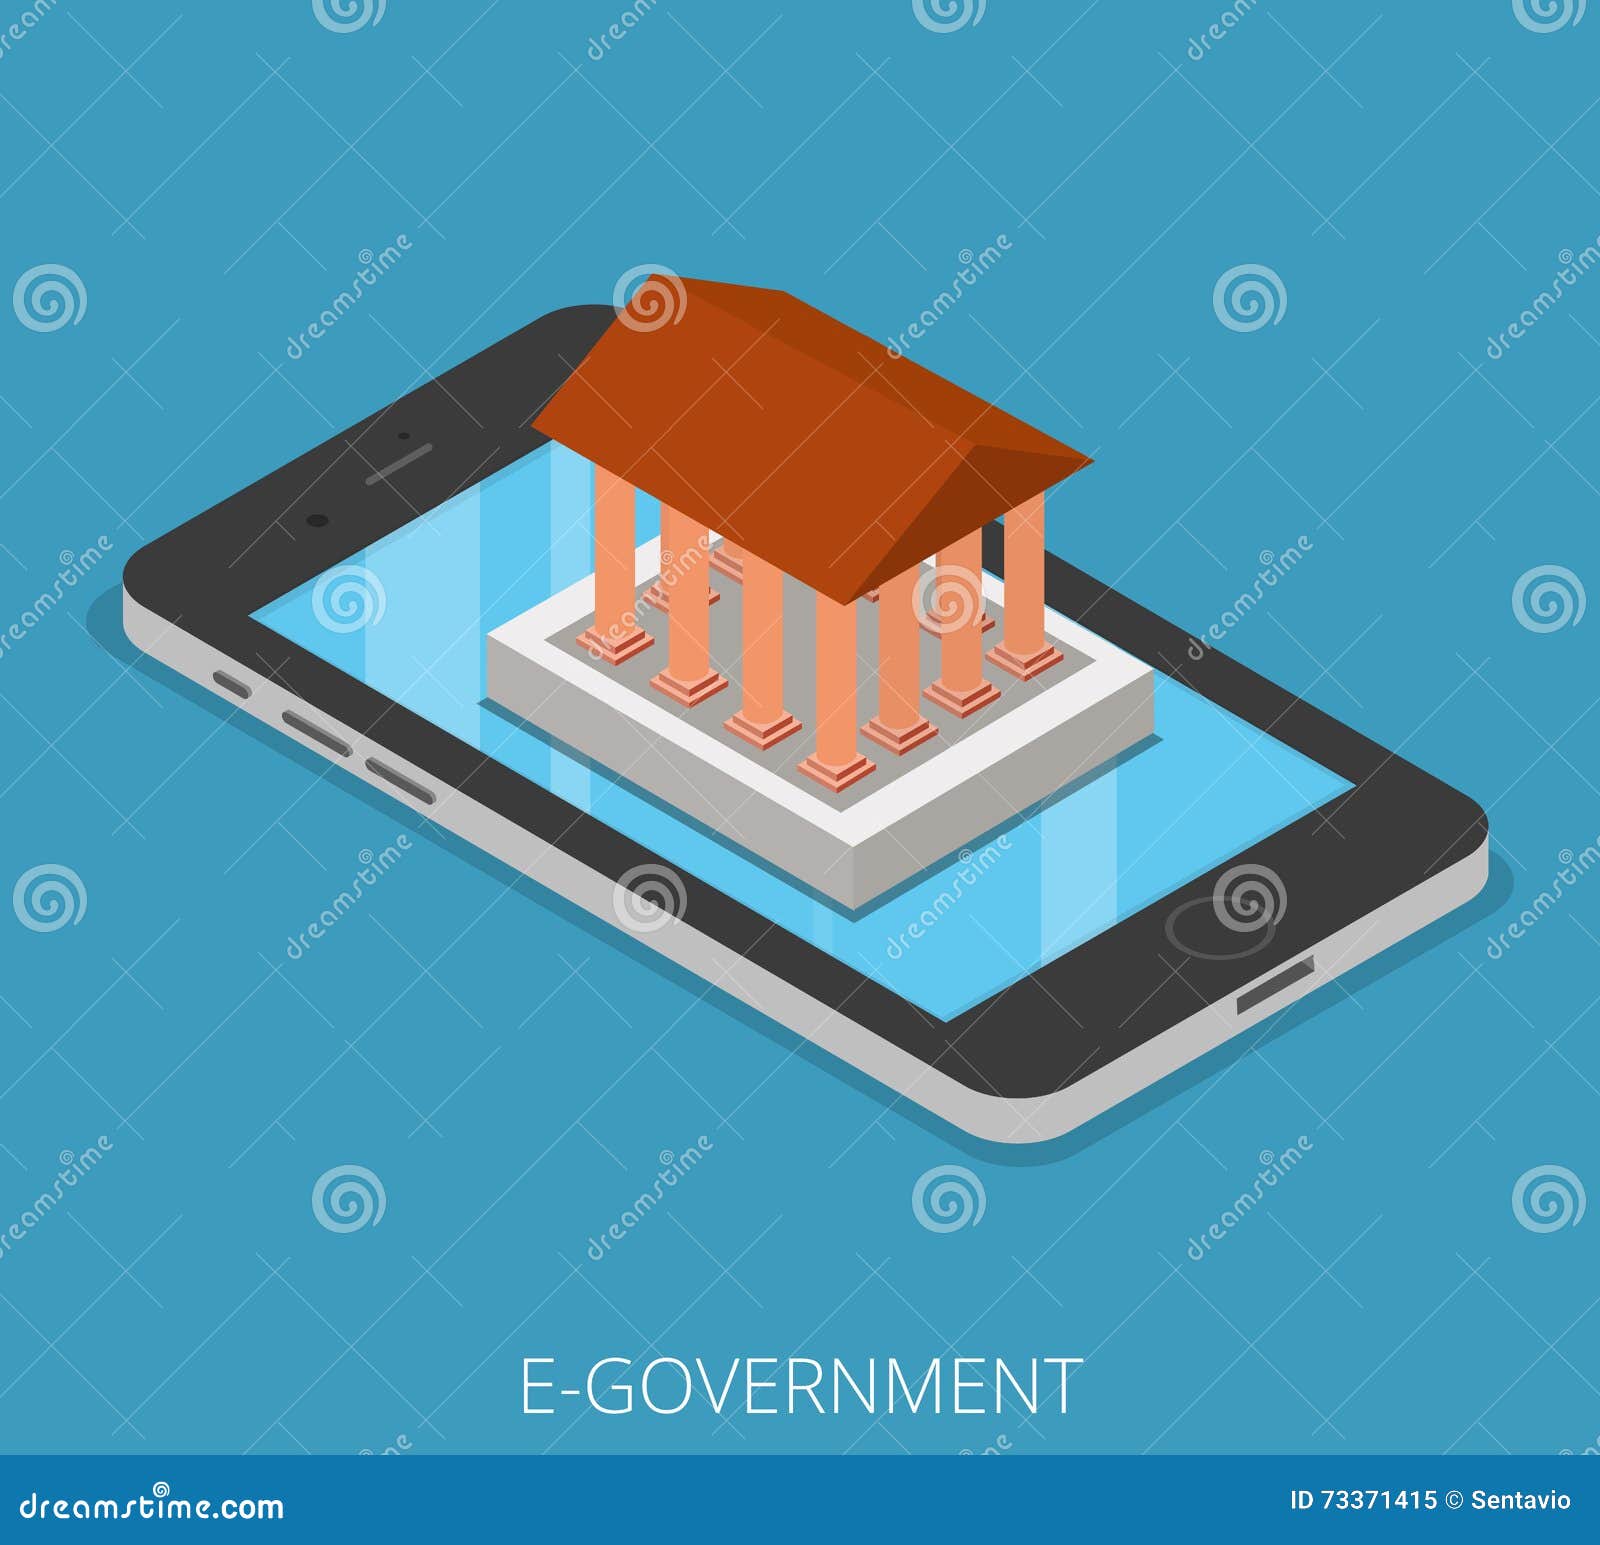 building e-government phone business isometric fla